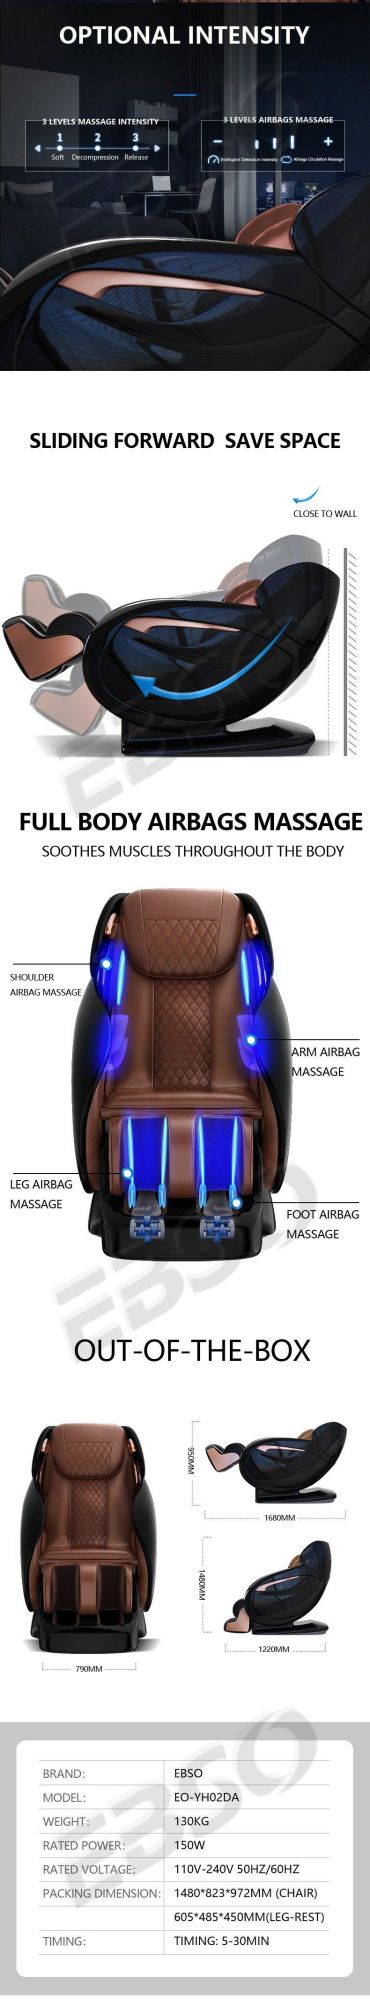 Hot Sale Office and Home Relaxation Shiatsu 3D Rocking Massage Chair Message Chair